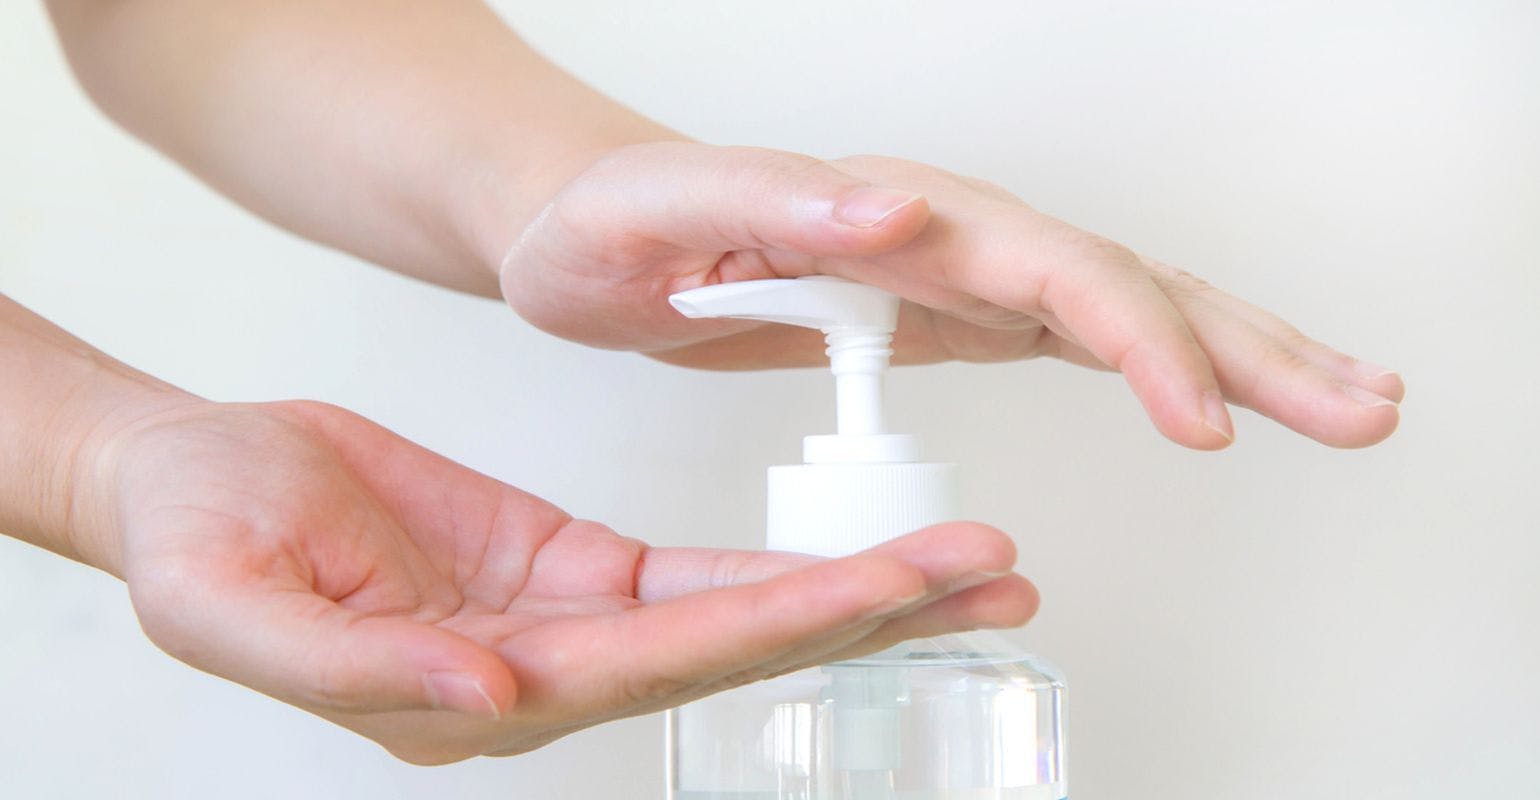 FDA Issues Final Rule on Safety and Effectiveness of Consumer Hand Sanitizers